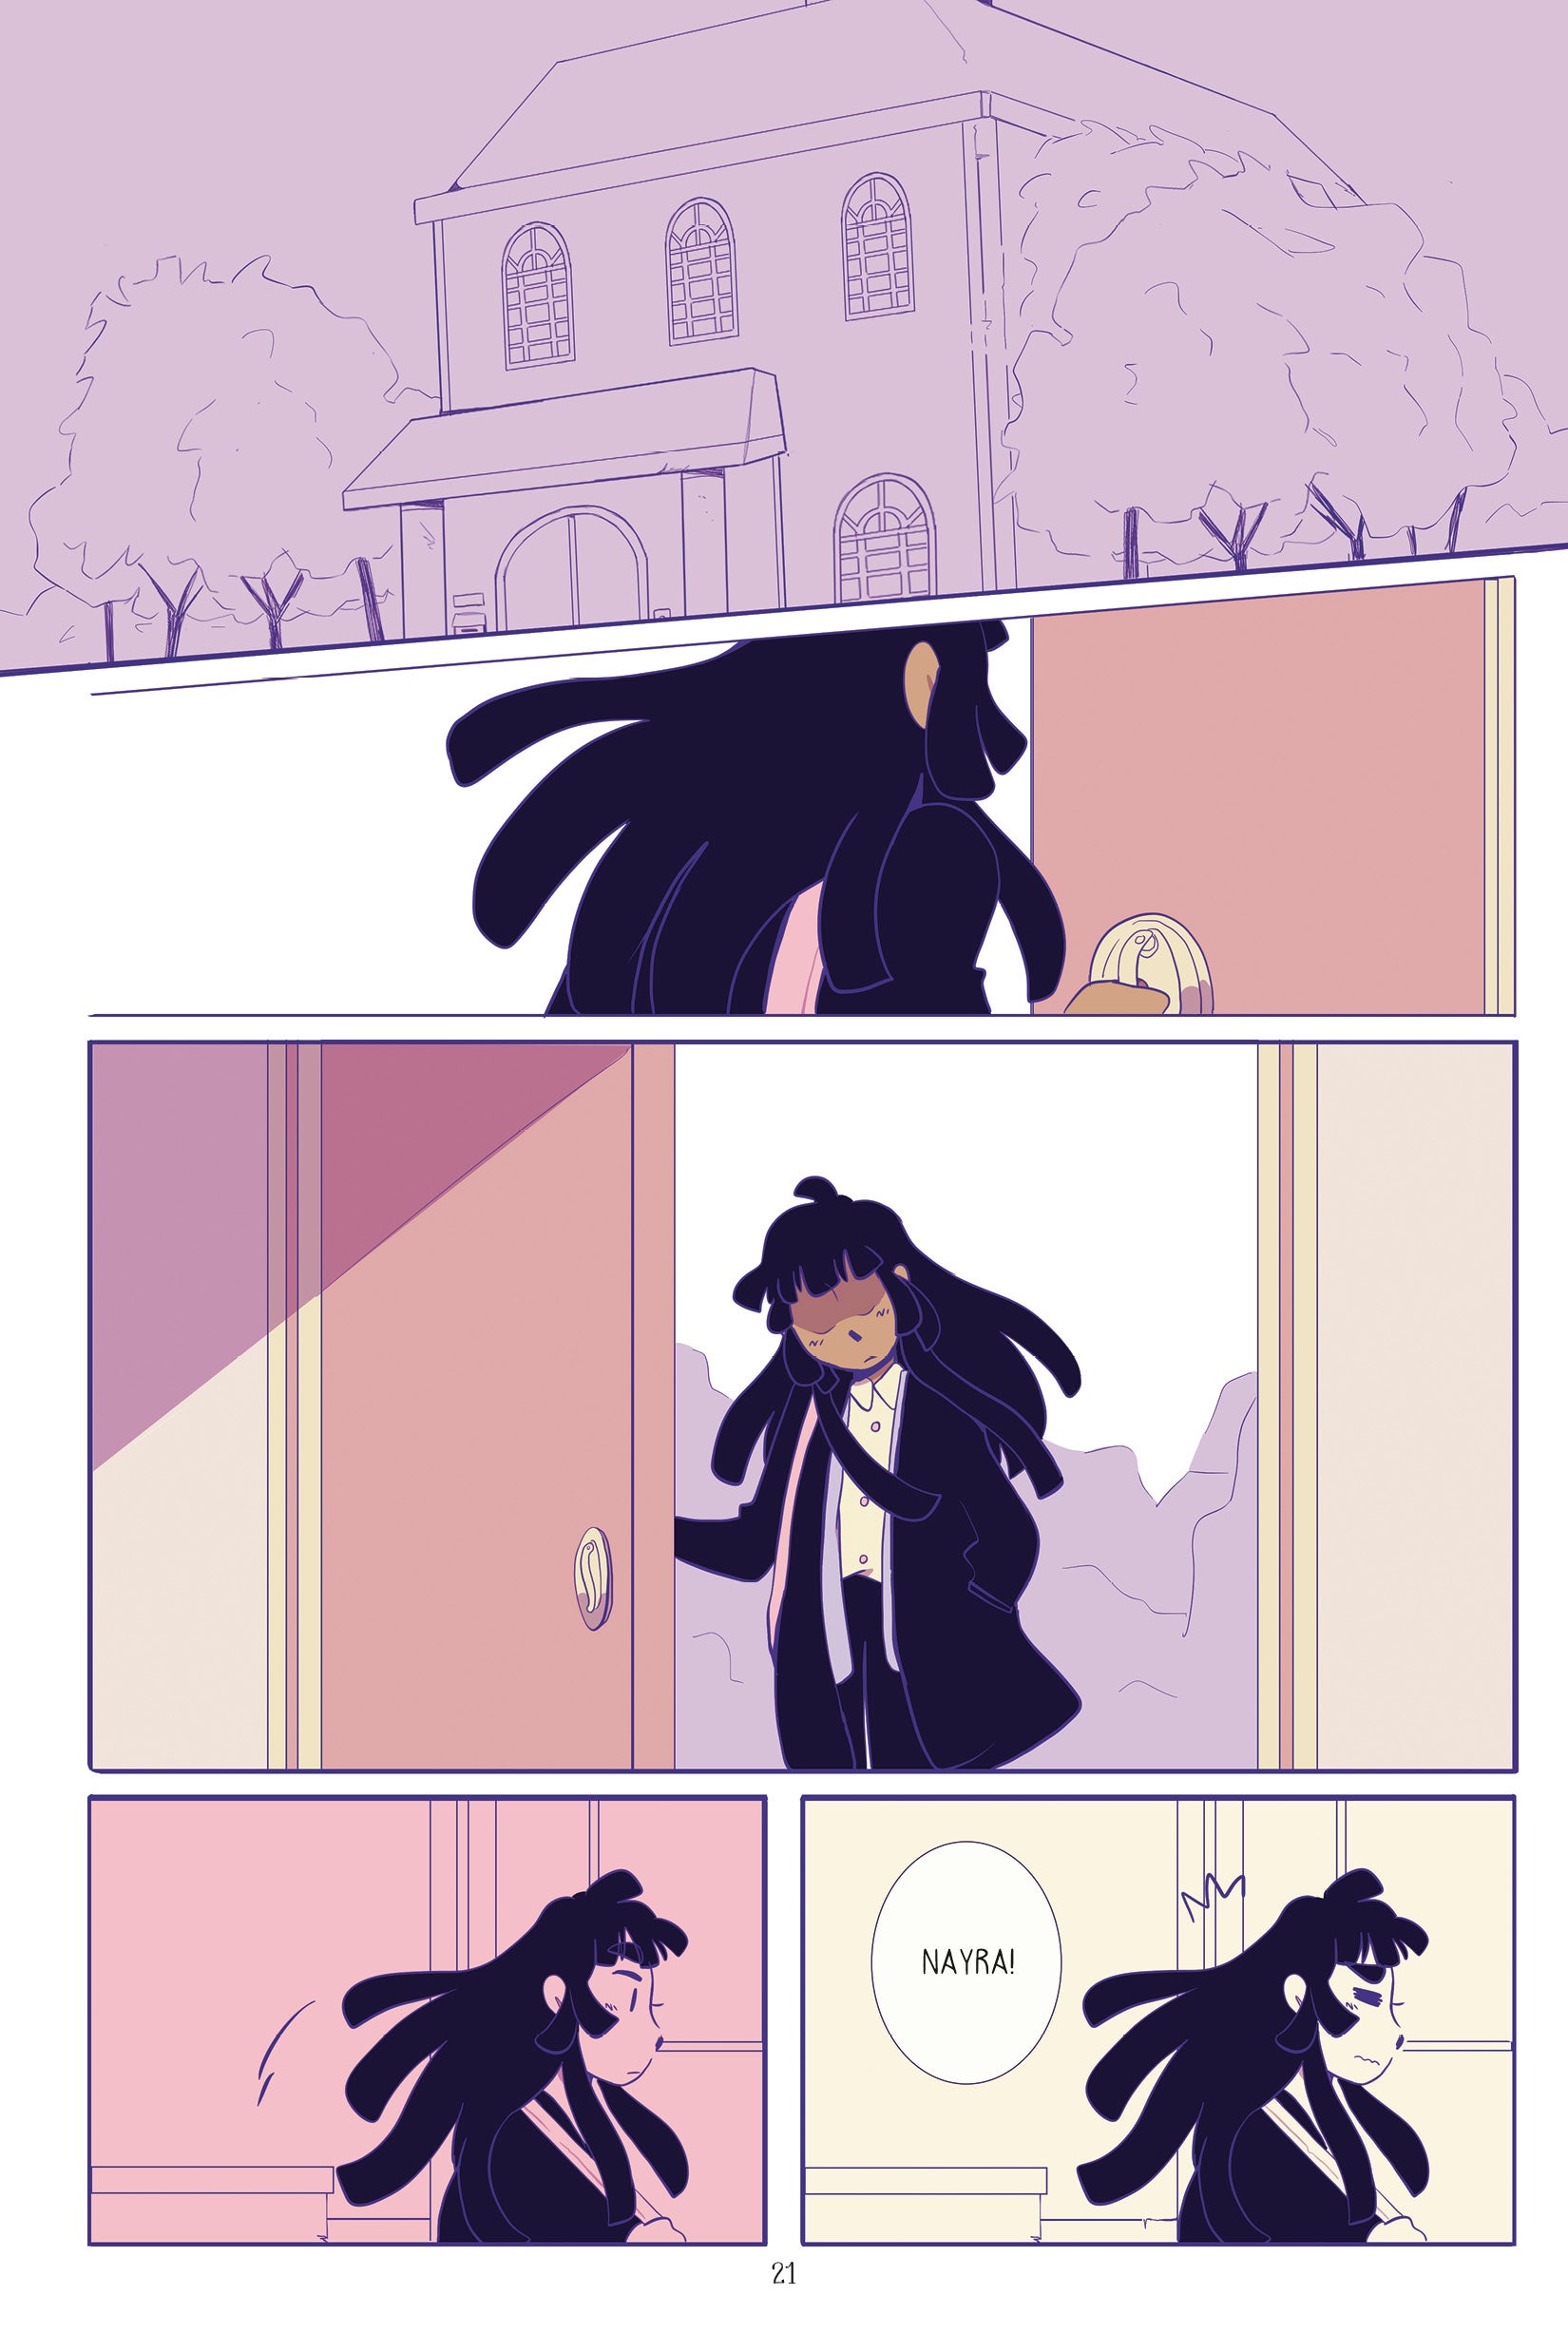 A comics page featuring a house, then a girl walking into the house. The bottom of the page, there's an unconnected world balloon that reads "Nayra!"